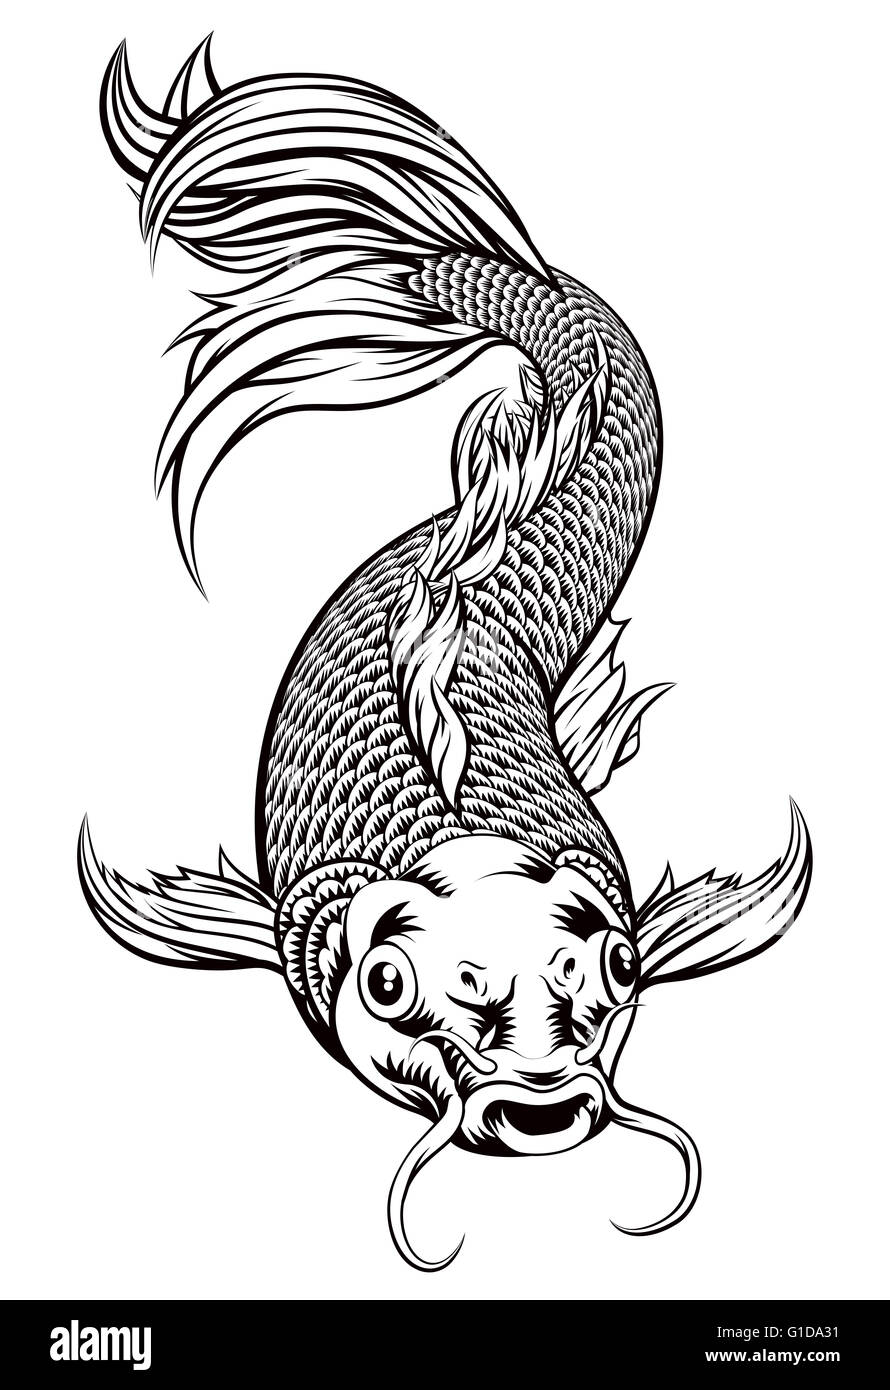 An original illustration of a koi carp fish in a vintage woodcut style Stock Photo